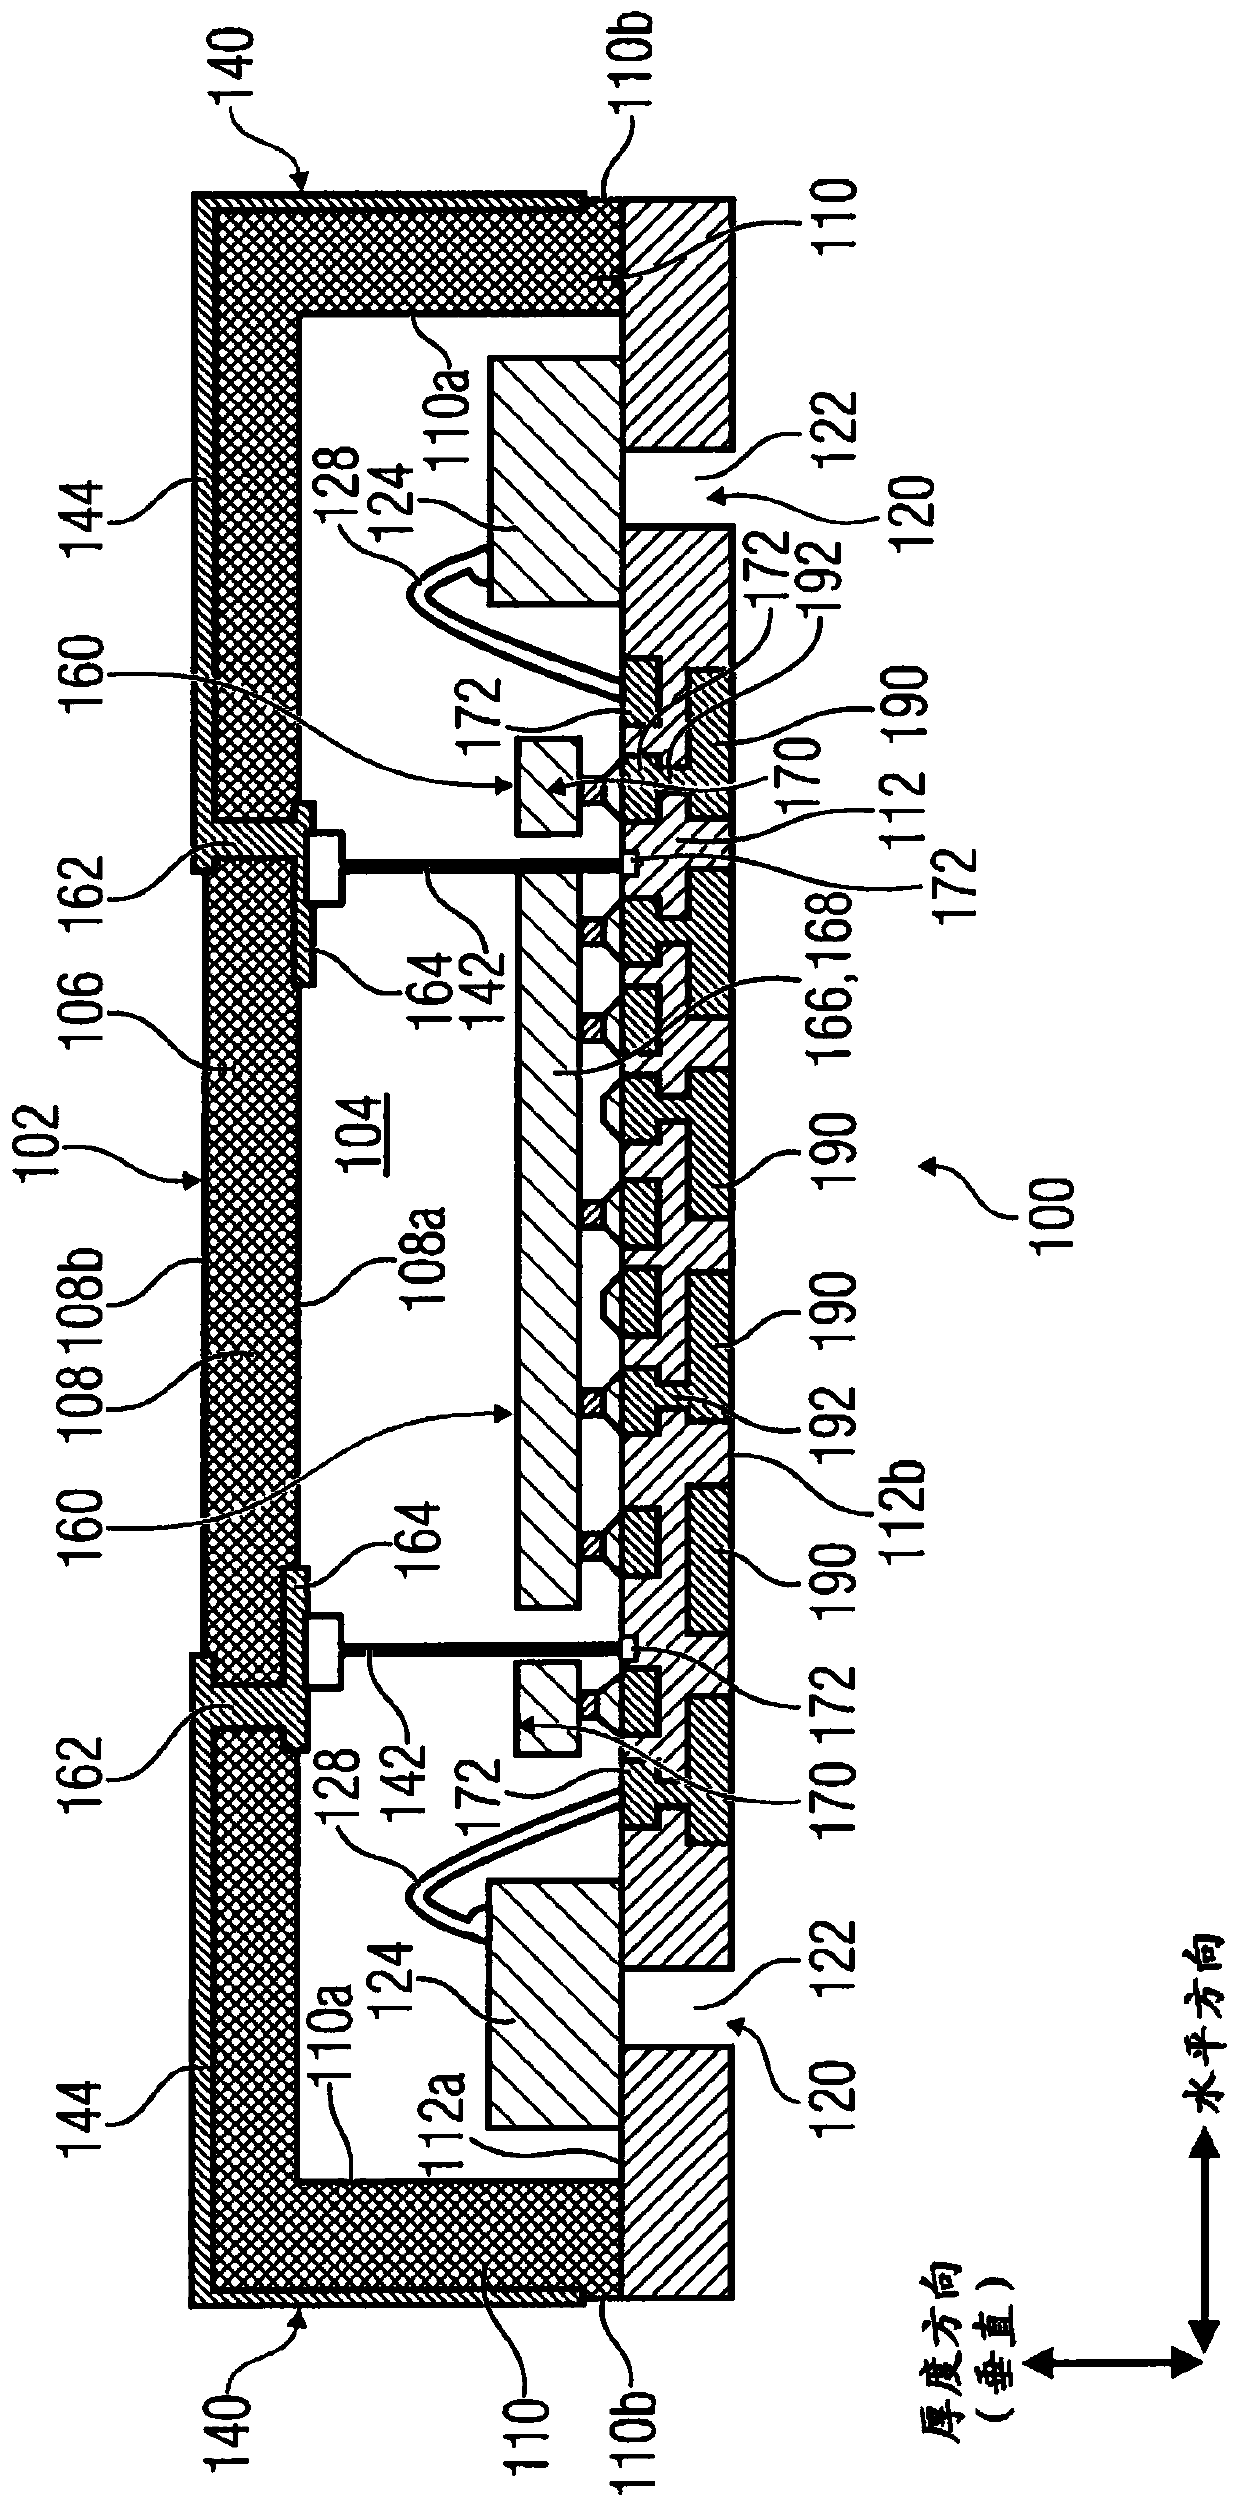 Package with acoustic sensing device(s) and millimeter wave sensing elements